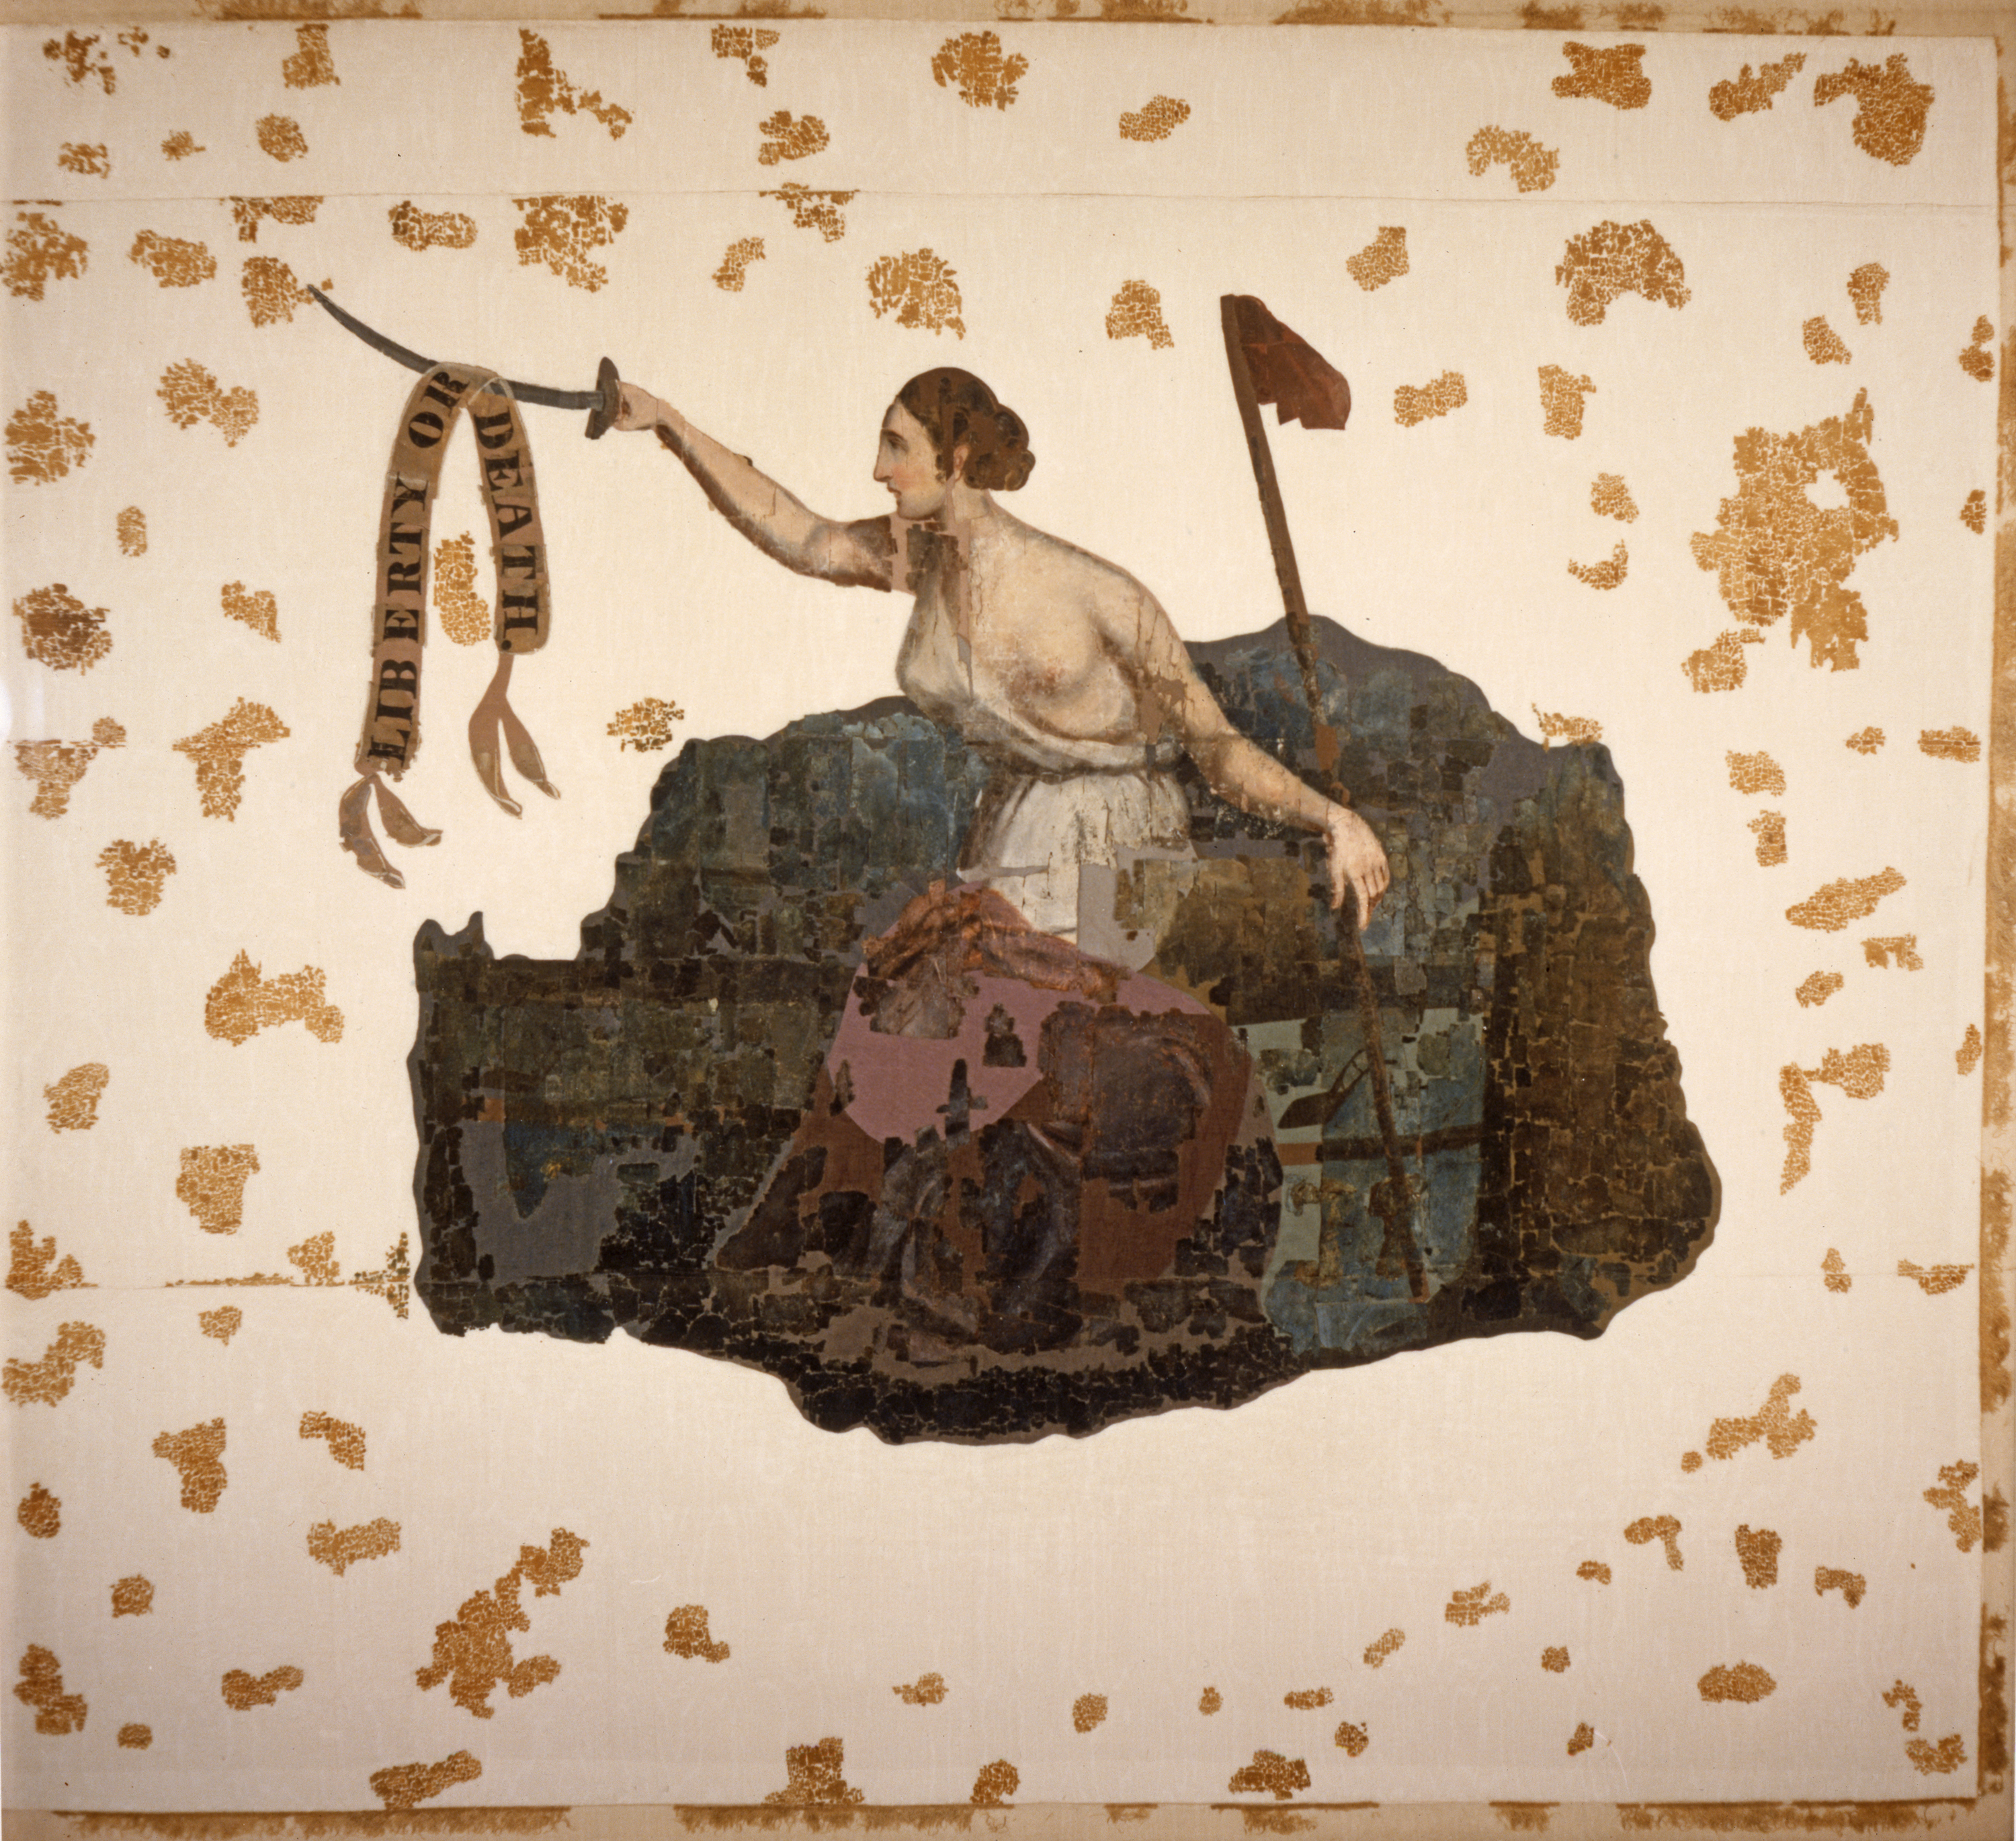 <i>San Jacinto Battle Flag from 1835</i>. This historic painted silk flag with Lady Liberty carrying a cutlass with the banner "liberty or death" was carried by Texian troops through the 18-minute battle of San Jacinto in 1836. 